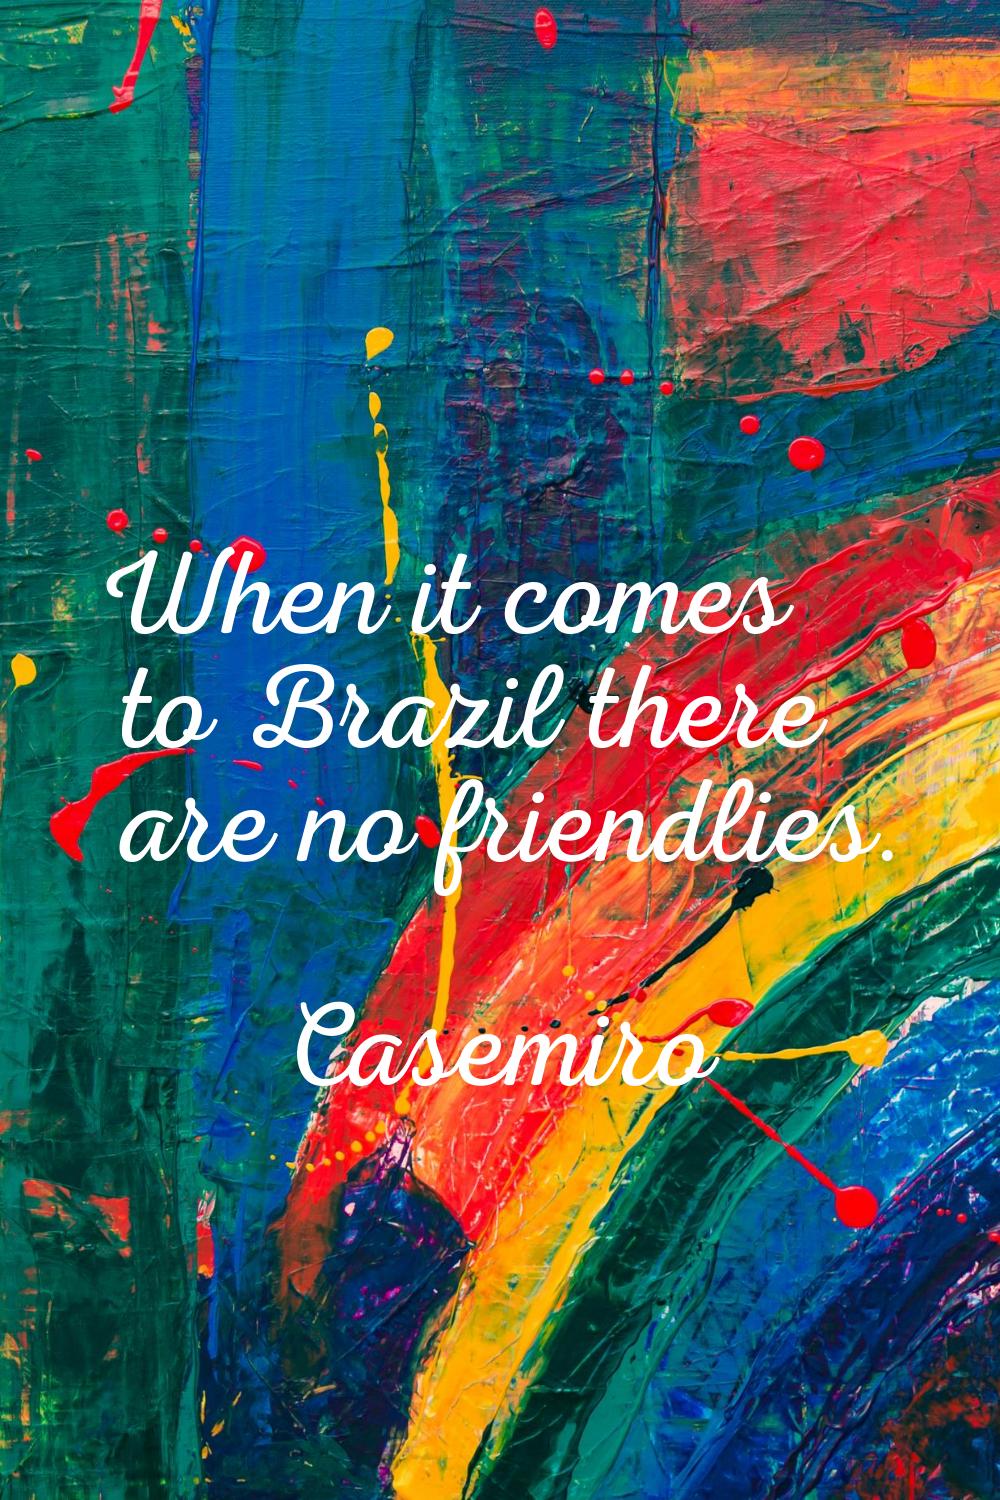 When it comes to Brazil there are no friendlies.